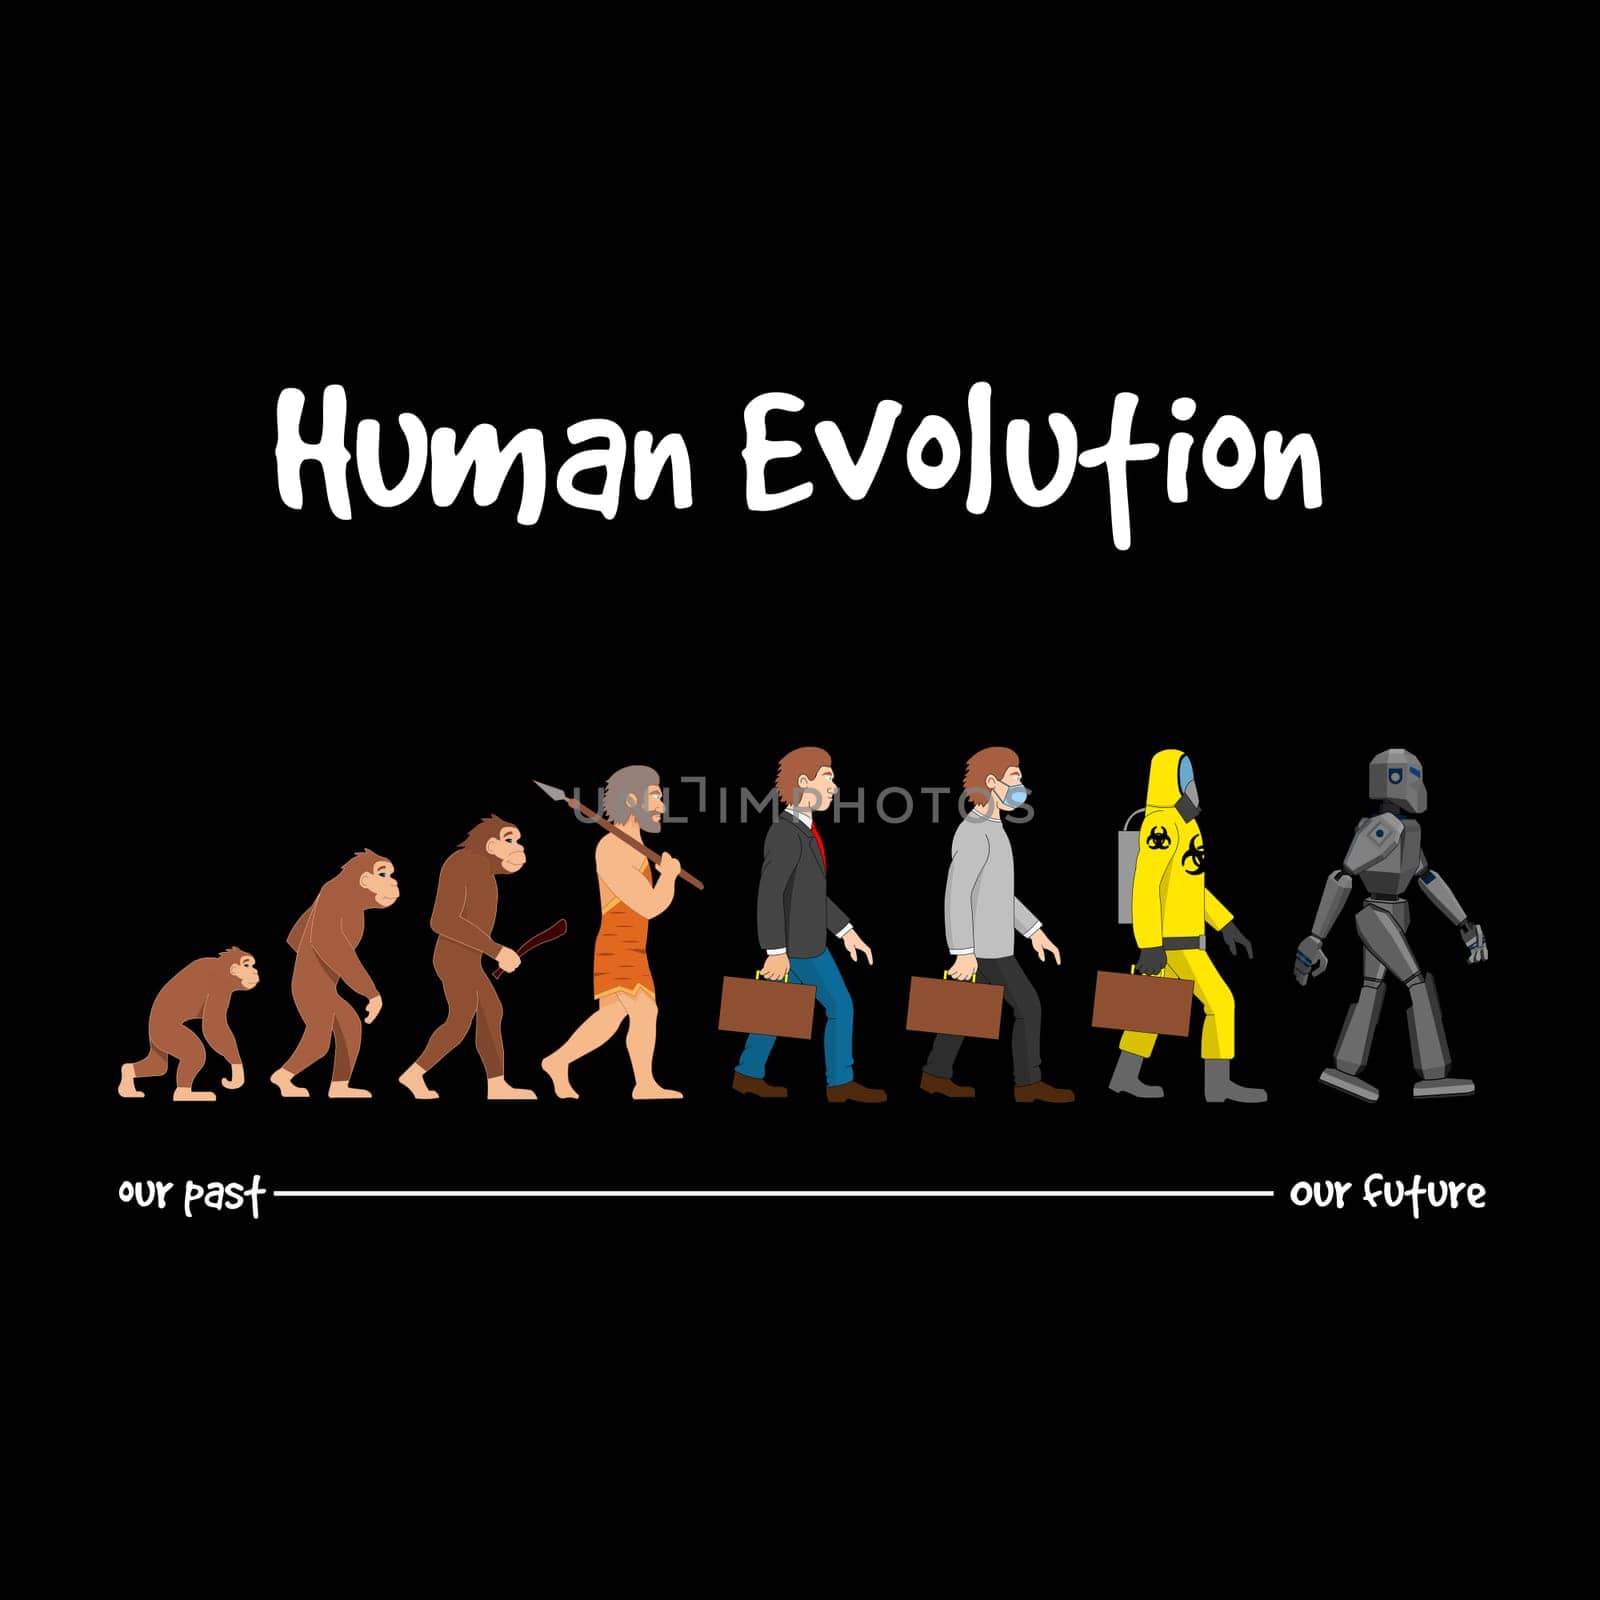 Evolution - our future by Bigalbaloo